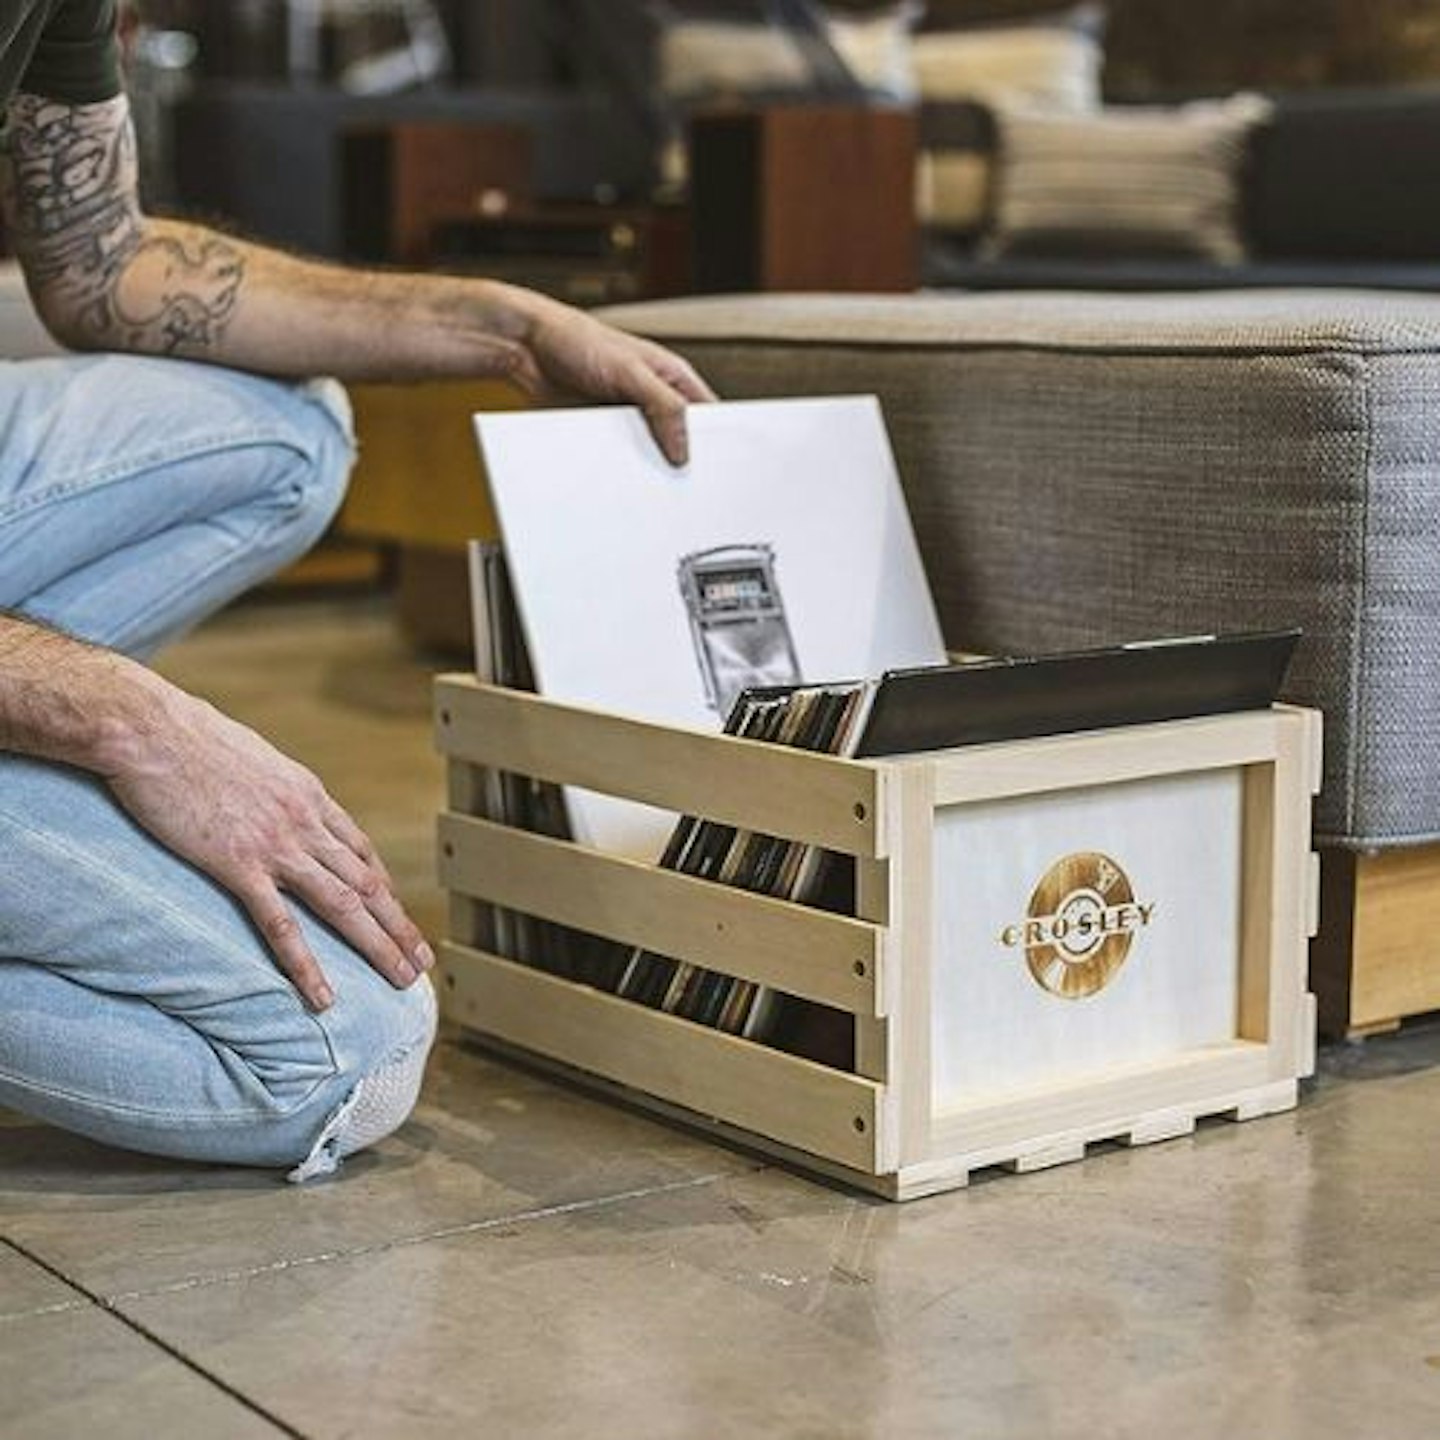 Crosley Record Storage Crate Holds up to 75 Albums, Natural